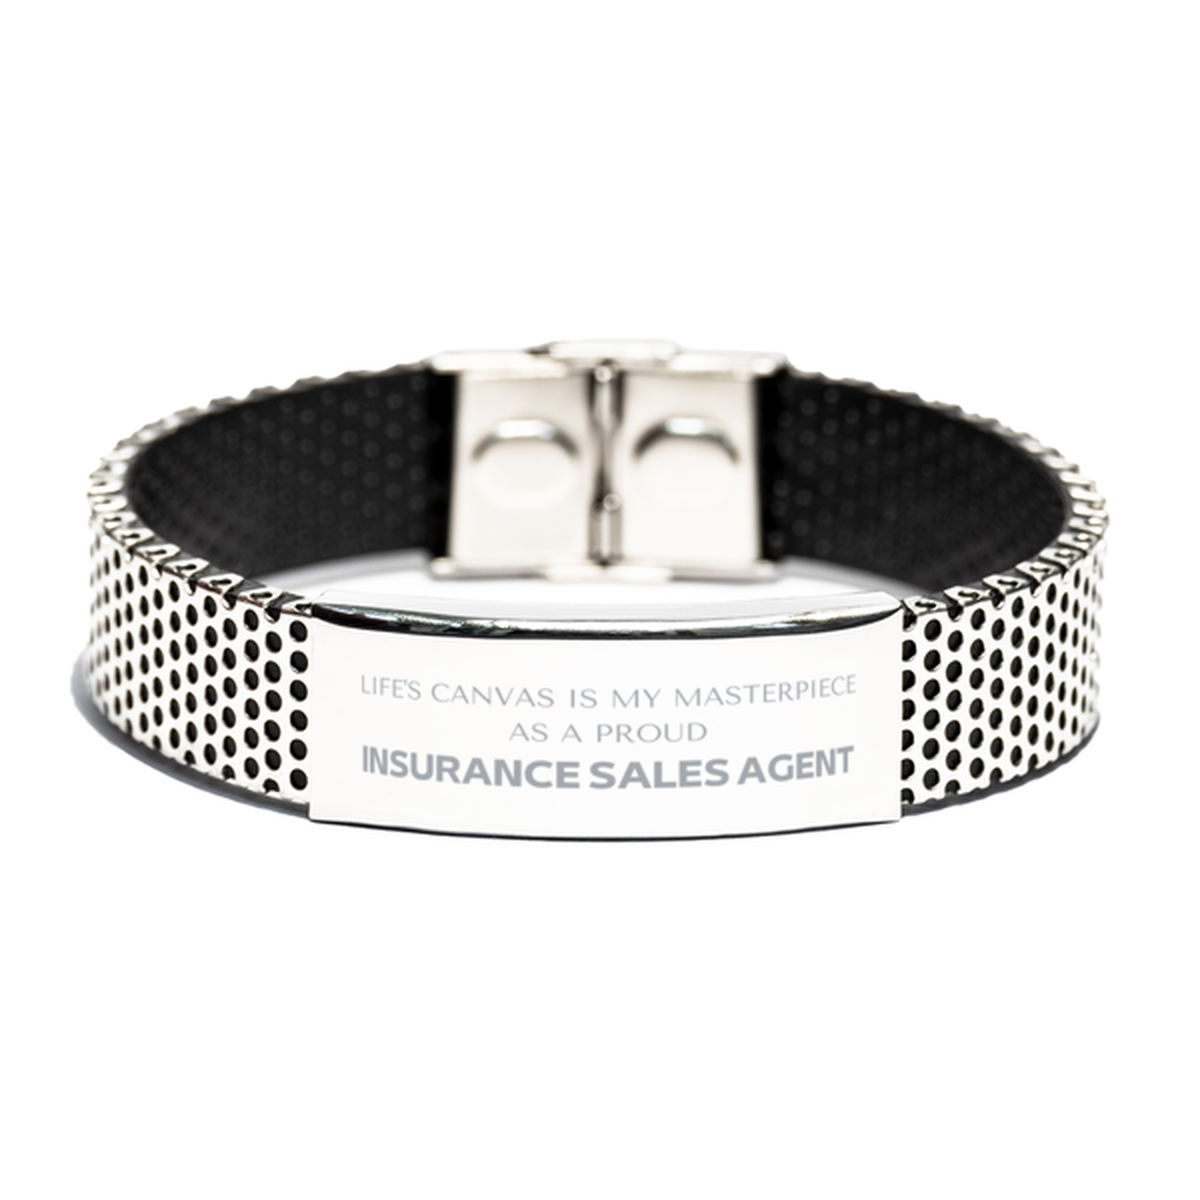 Proud Insurance Sales Agent Gifts, Life's canvas is my masterpiece, Epic Birthday Christmas Unique Stainless Steel Bracelet For Insurance Sales Agent, Coworkers, Men, Women, Friends